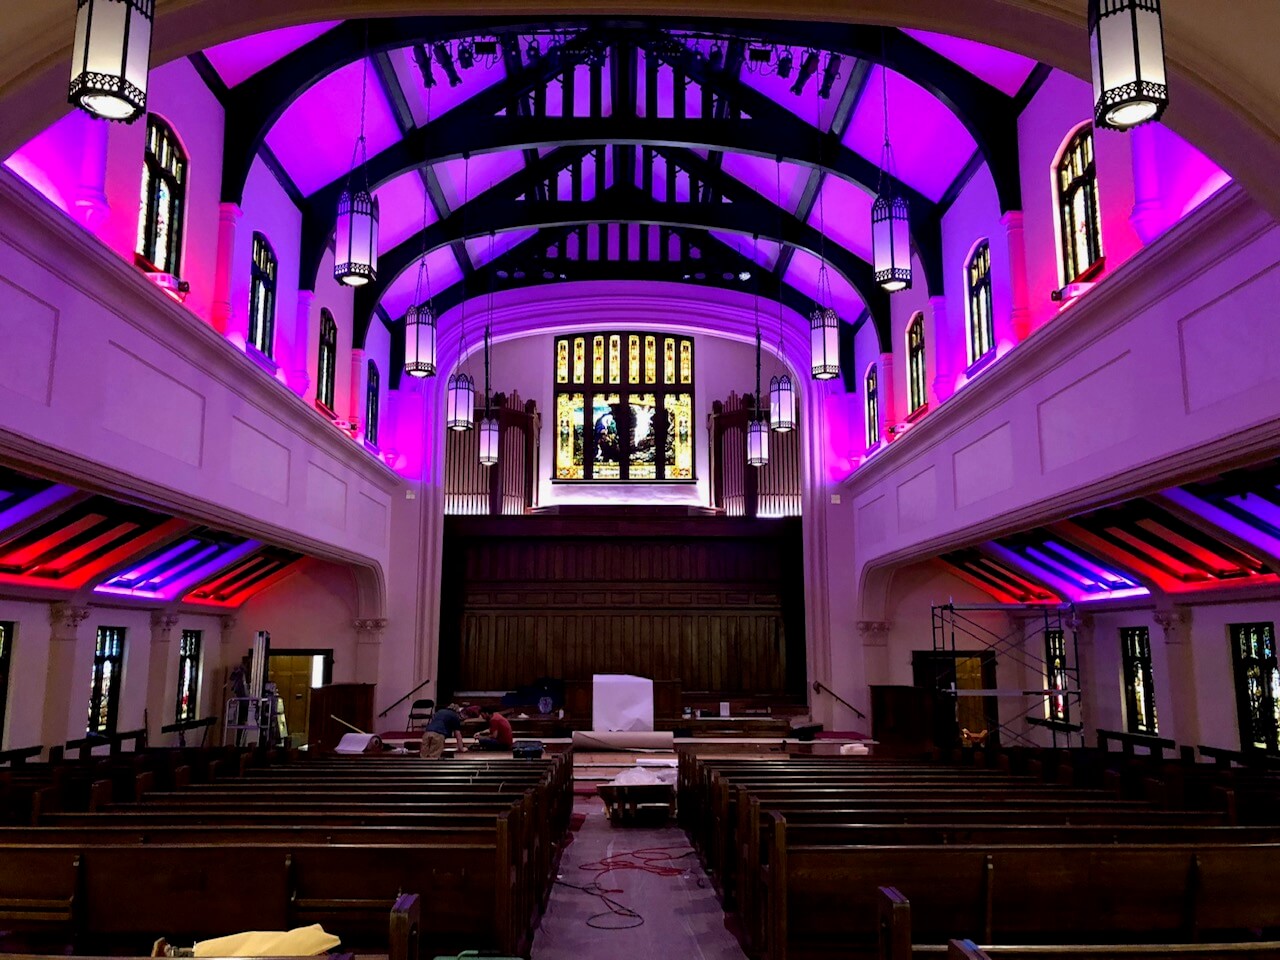 purple lighting in an arched building